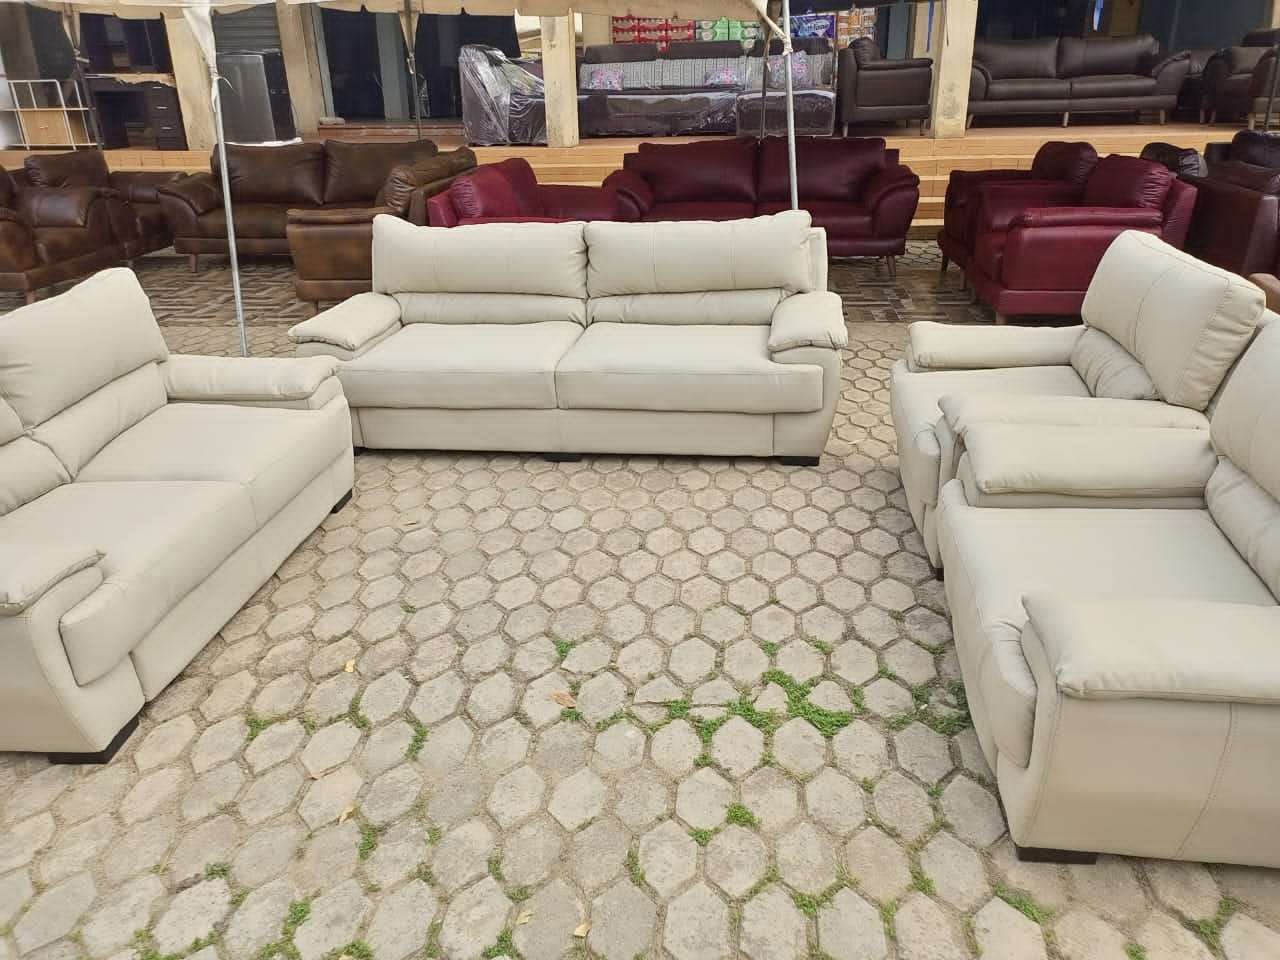 Set of turkey couch